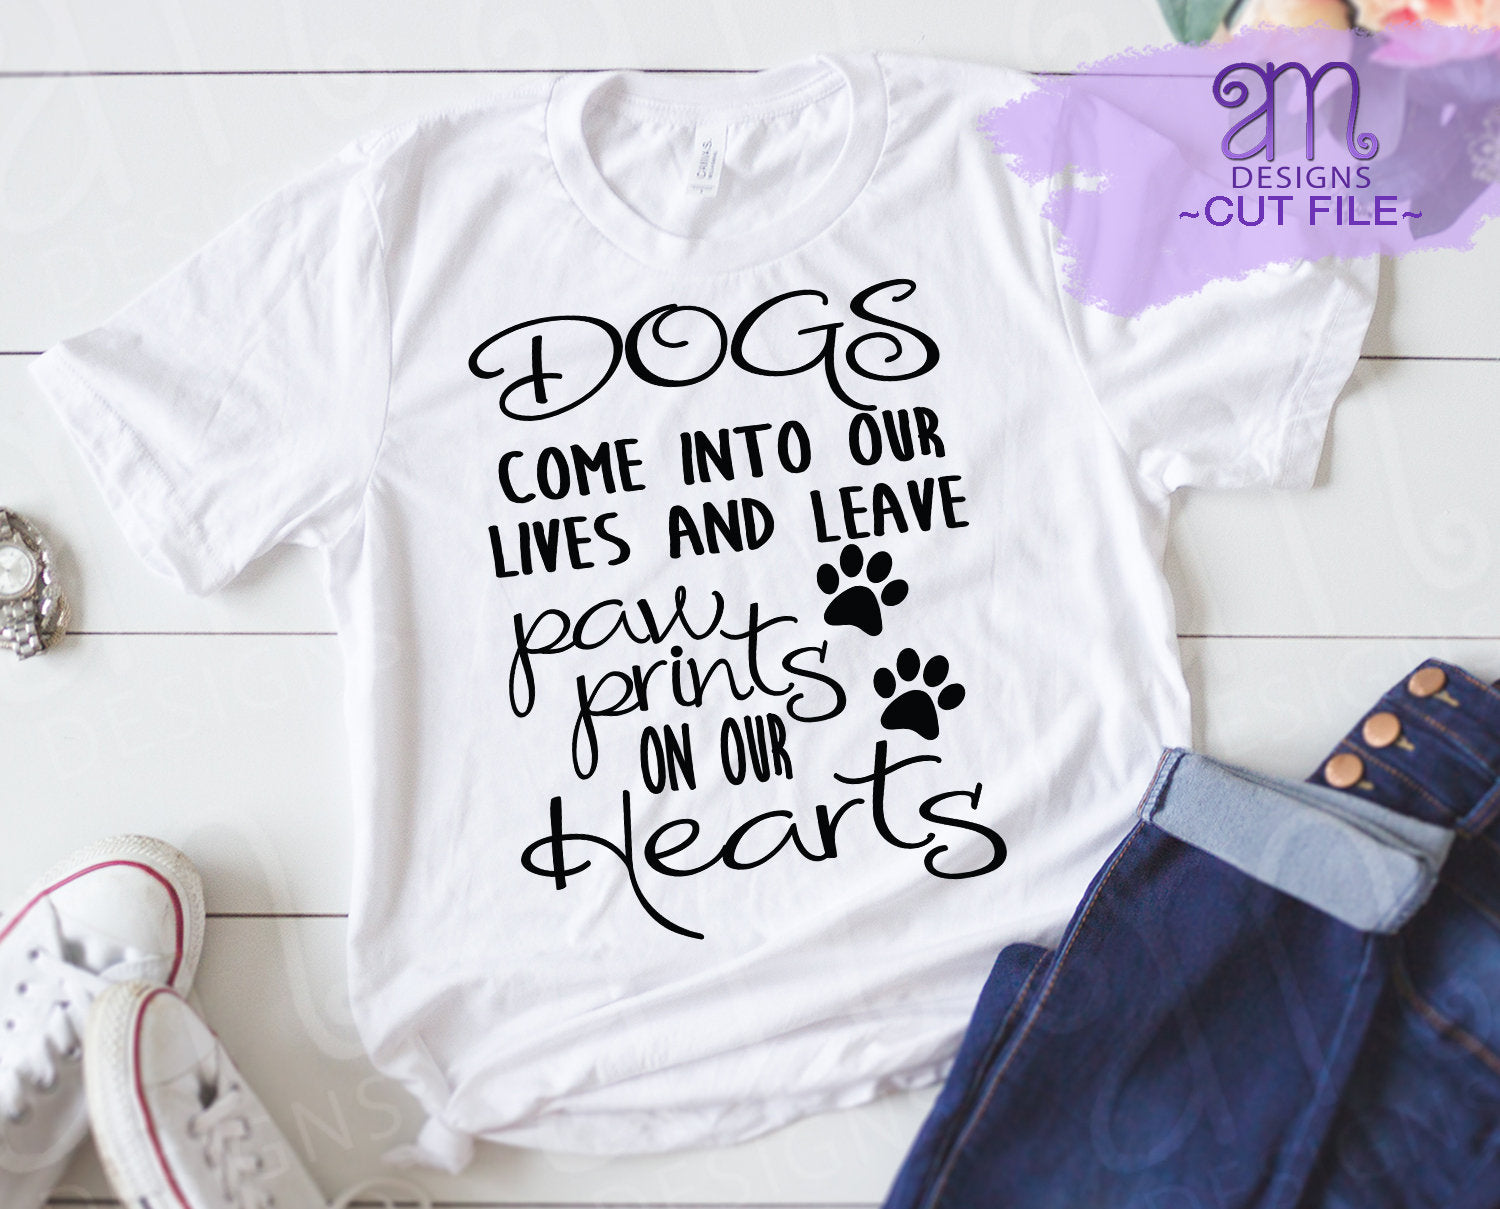 dogs come into our lives and leave paw prints on our hearts, dogs svg, dog lover svg, i love dogs svg, paw prints on heart, dog saying svg